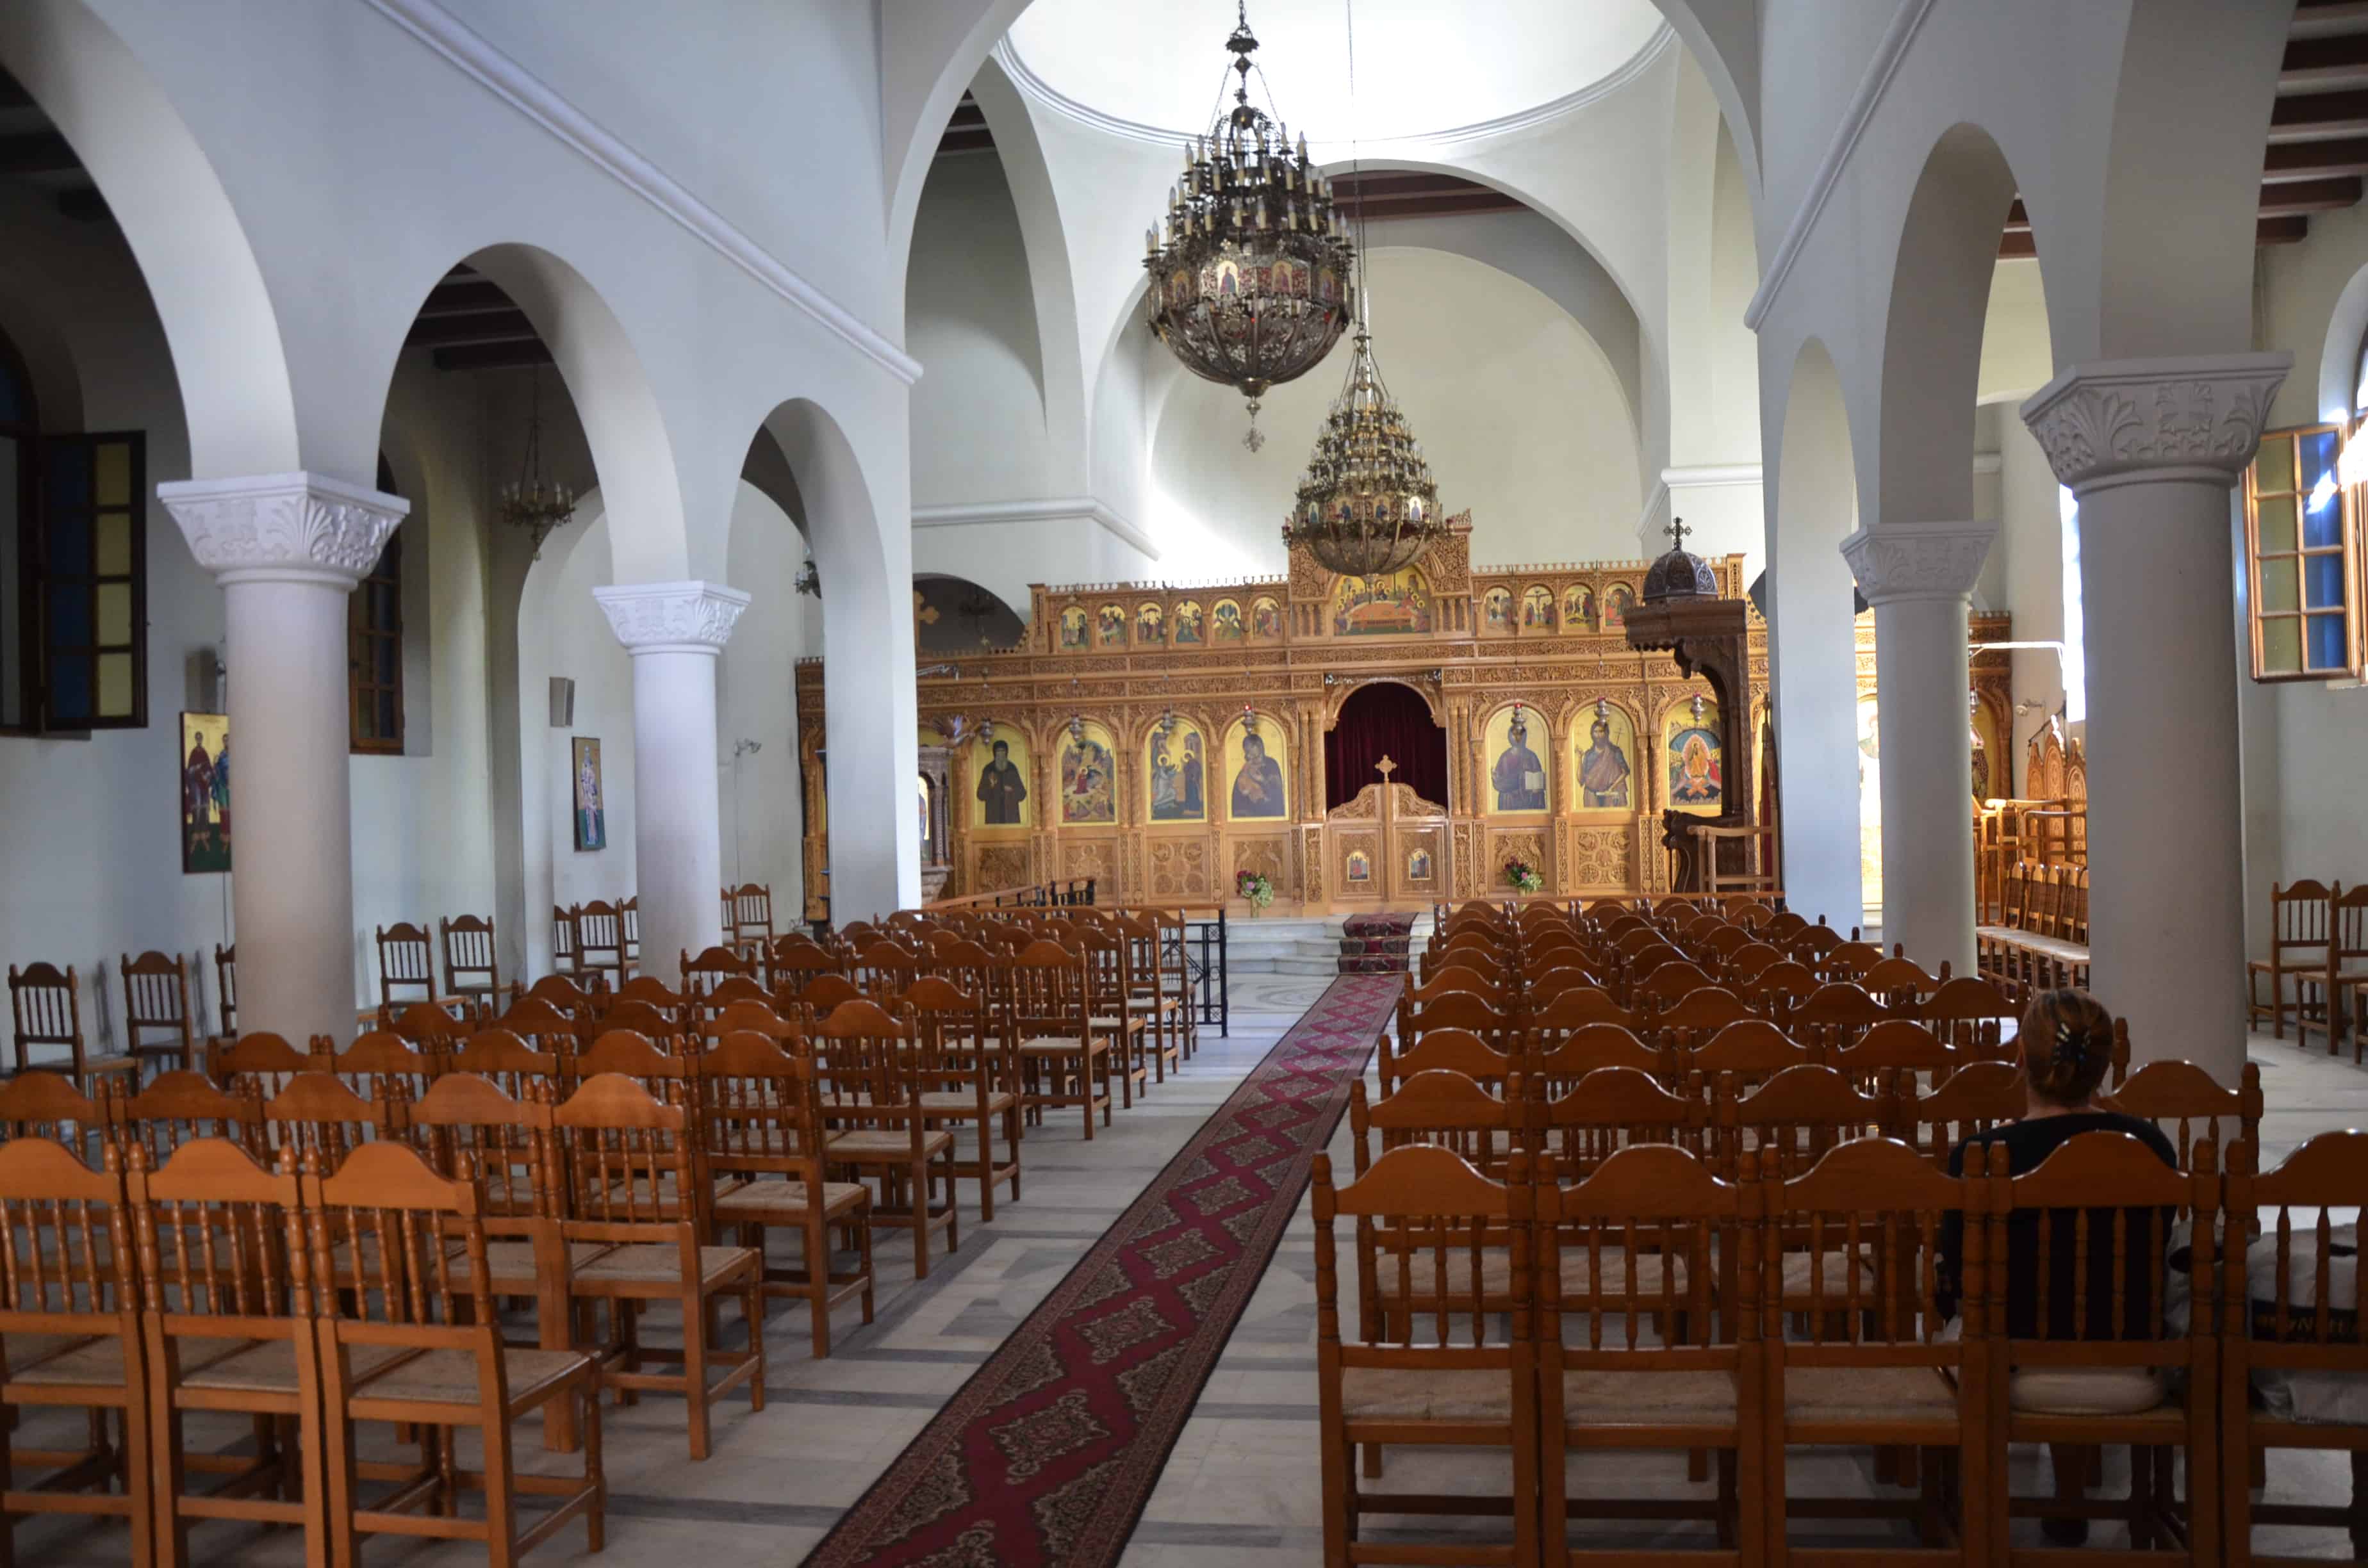 Orthodox Church of the Holy Annunciation in Tiranë, Albania